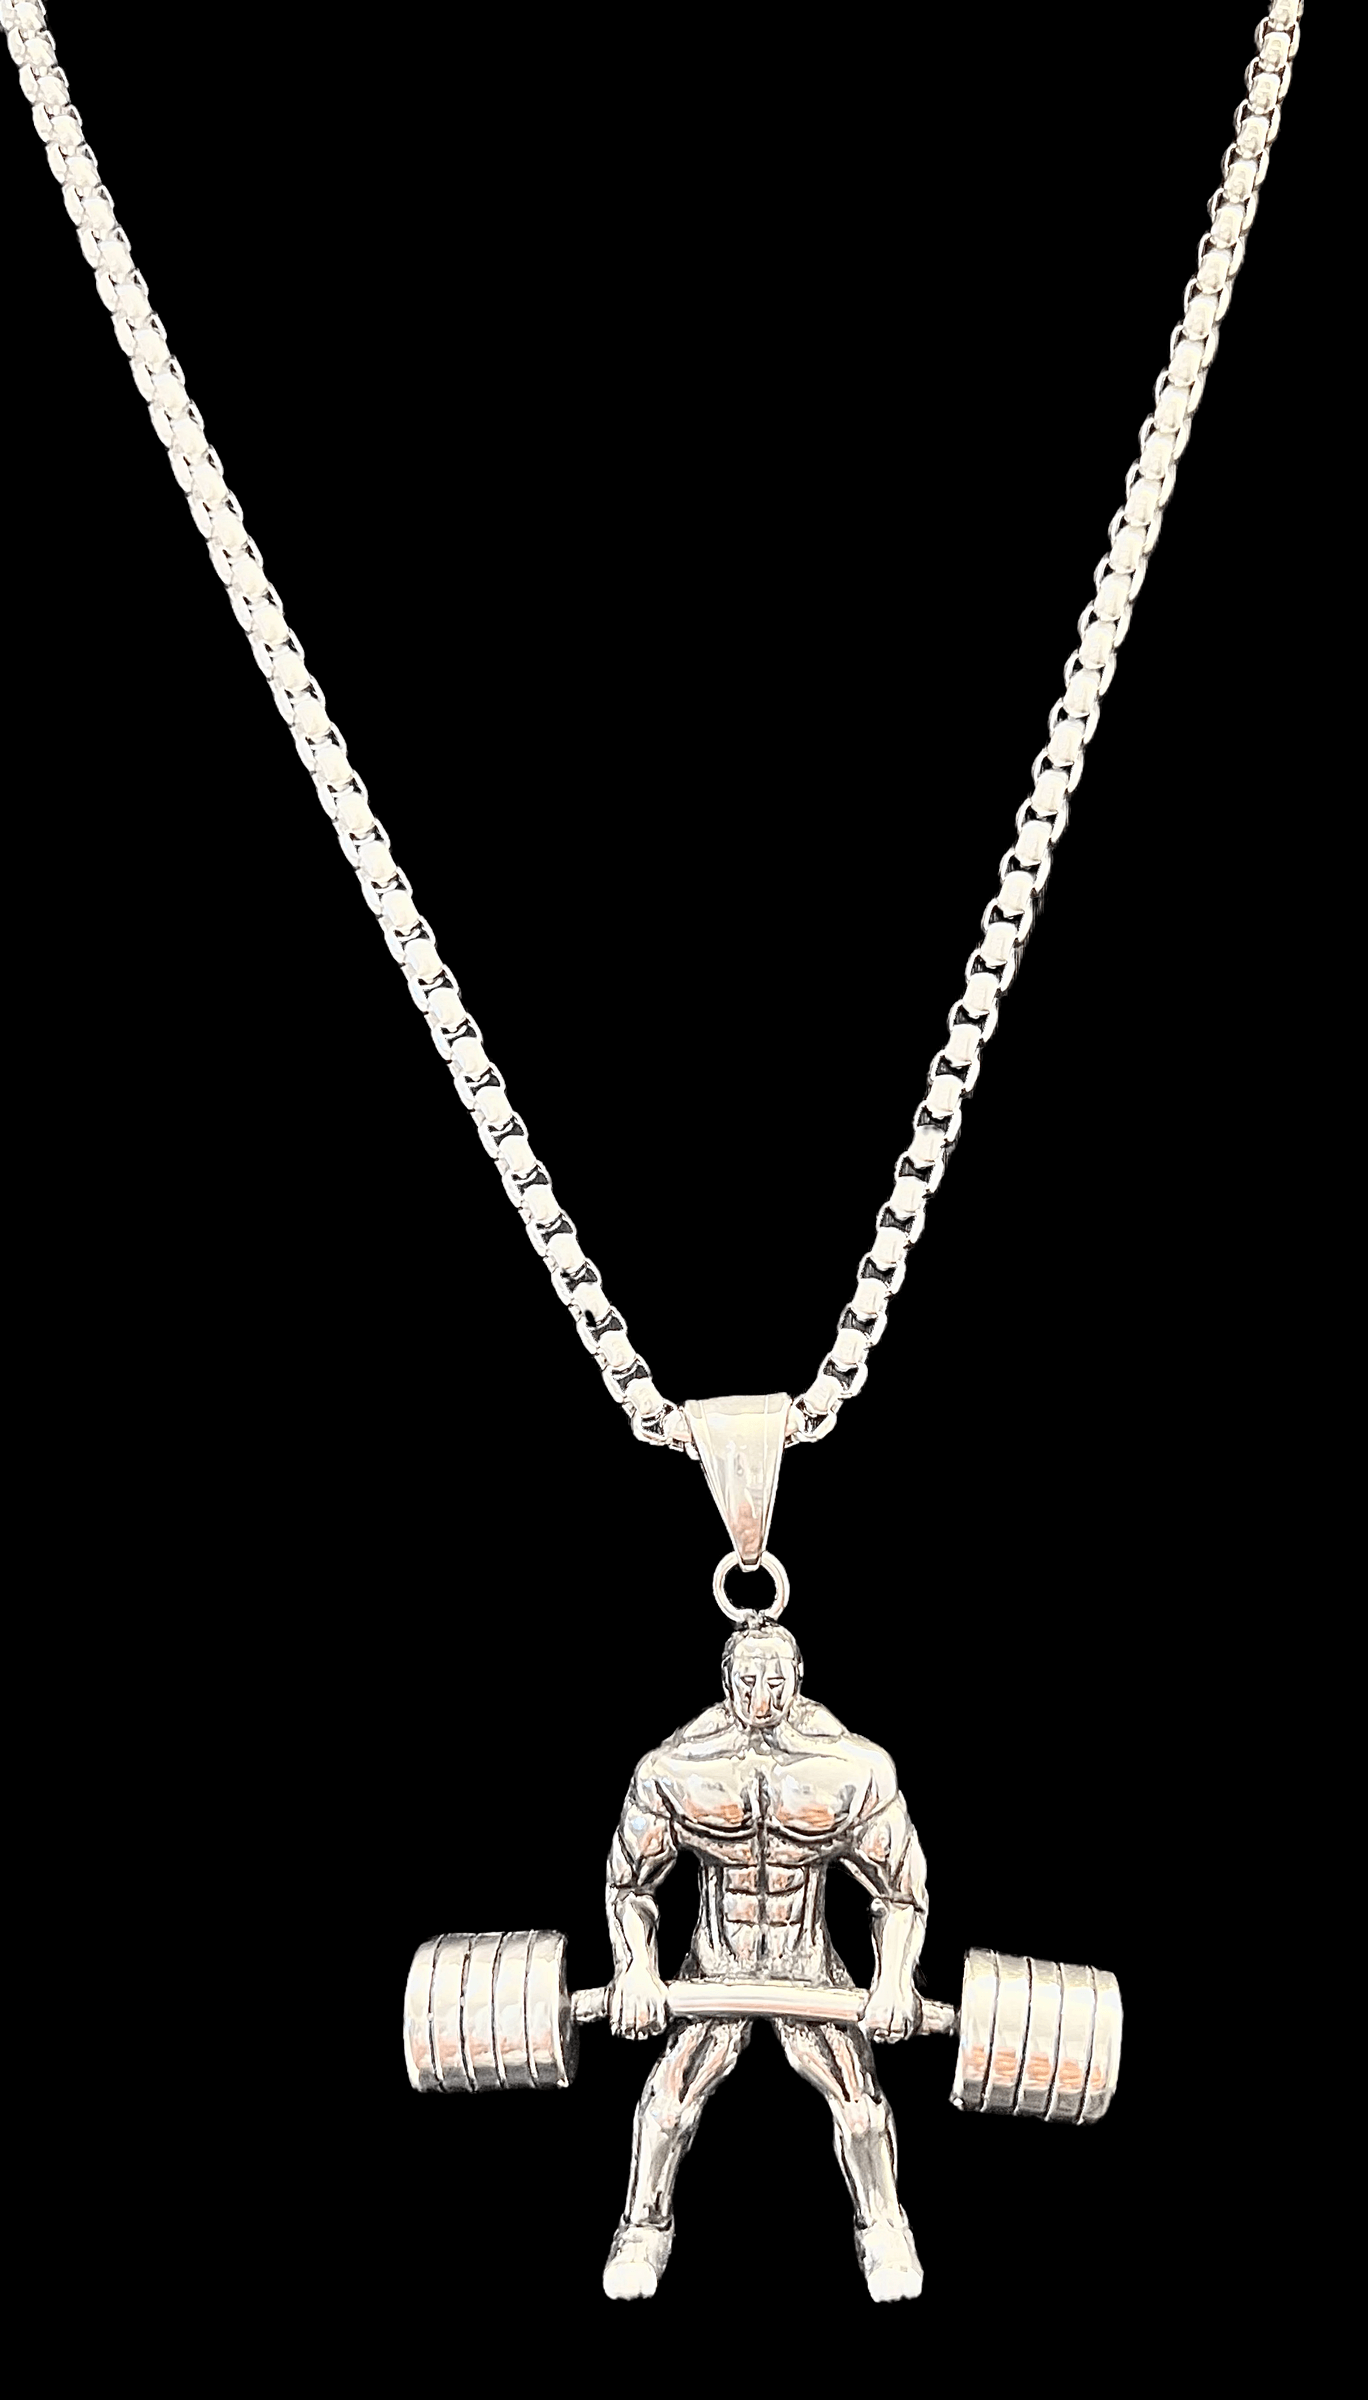 Power Lifter Muscle Man lifting weight stainless steel pendant and charm - Brent's Bling